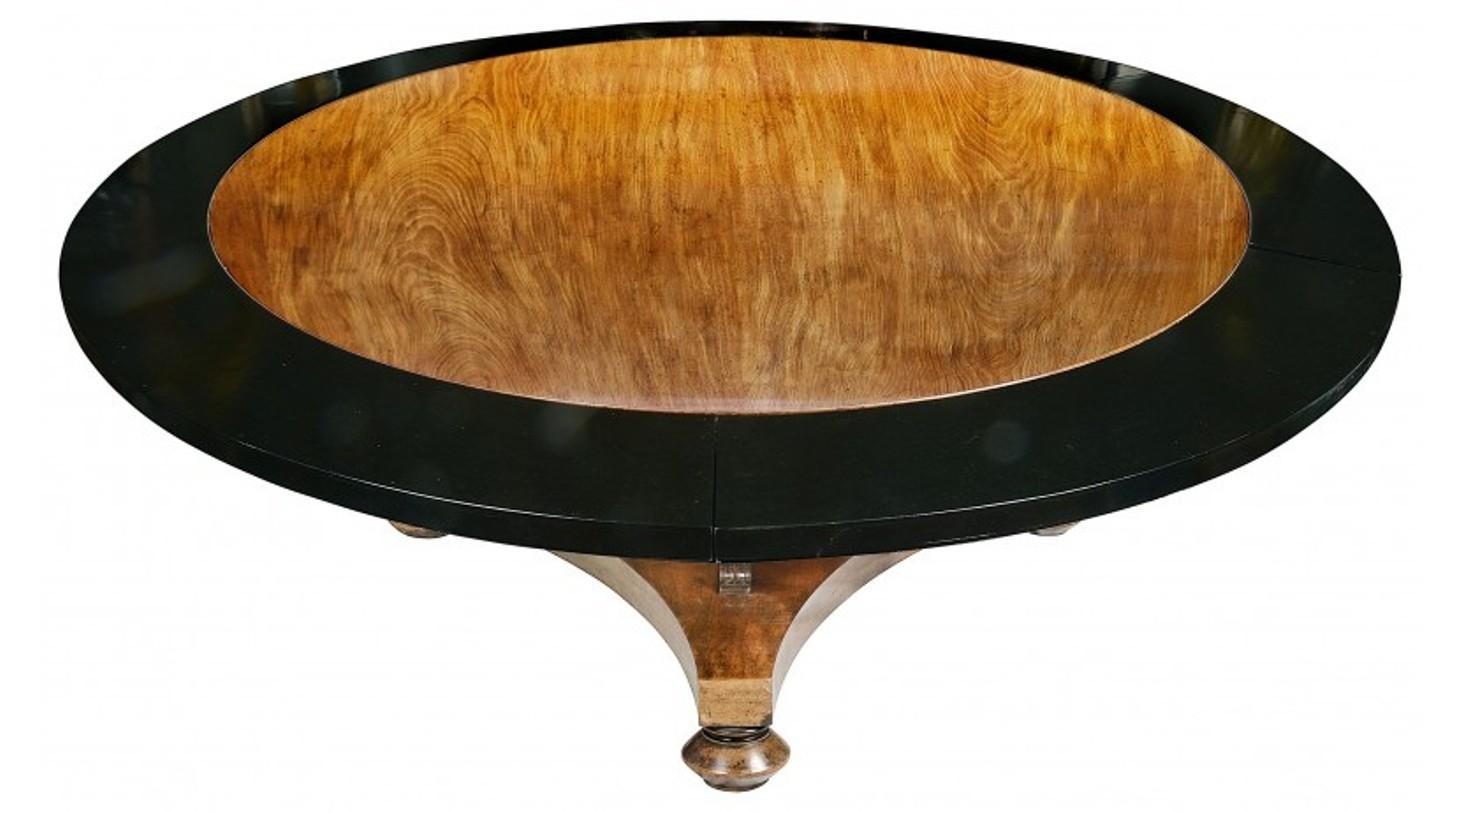 A very impressive late Regency period oval mahogany centre / dining table. Measure: 75